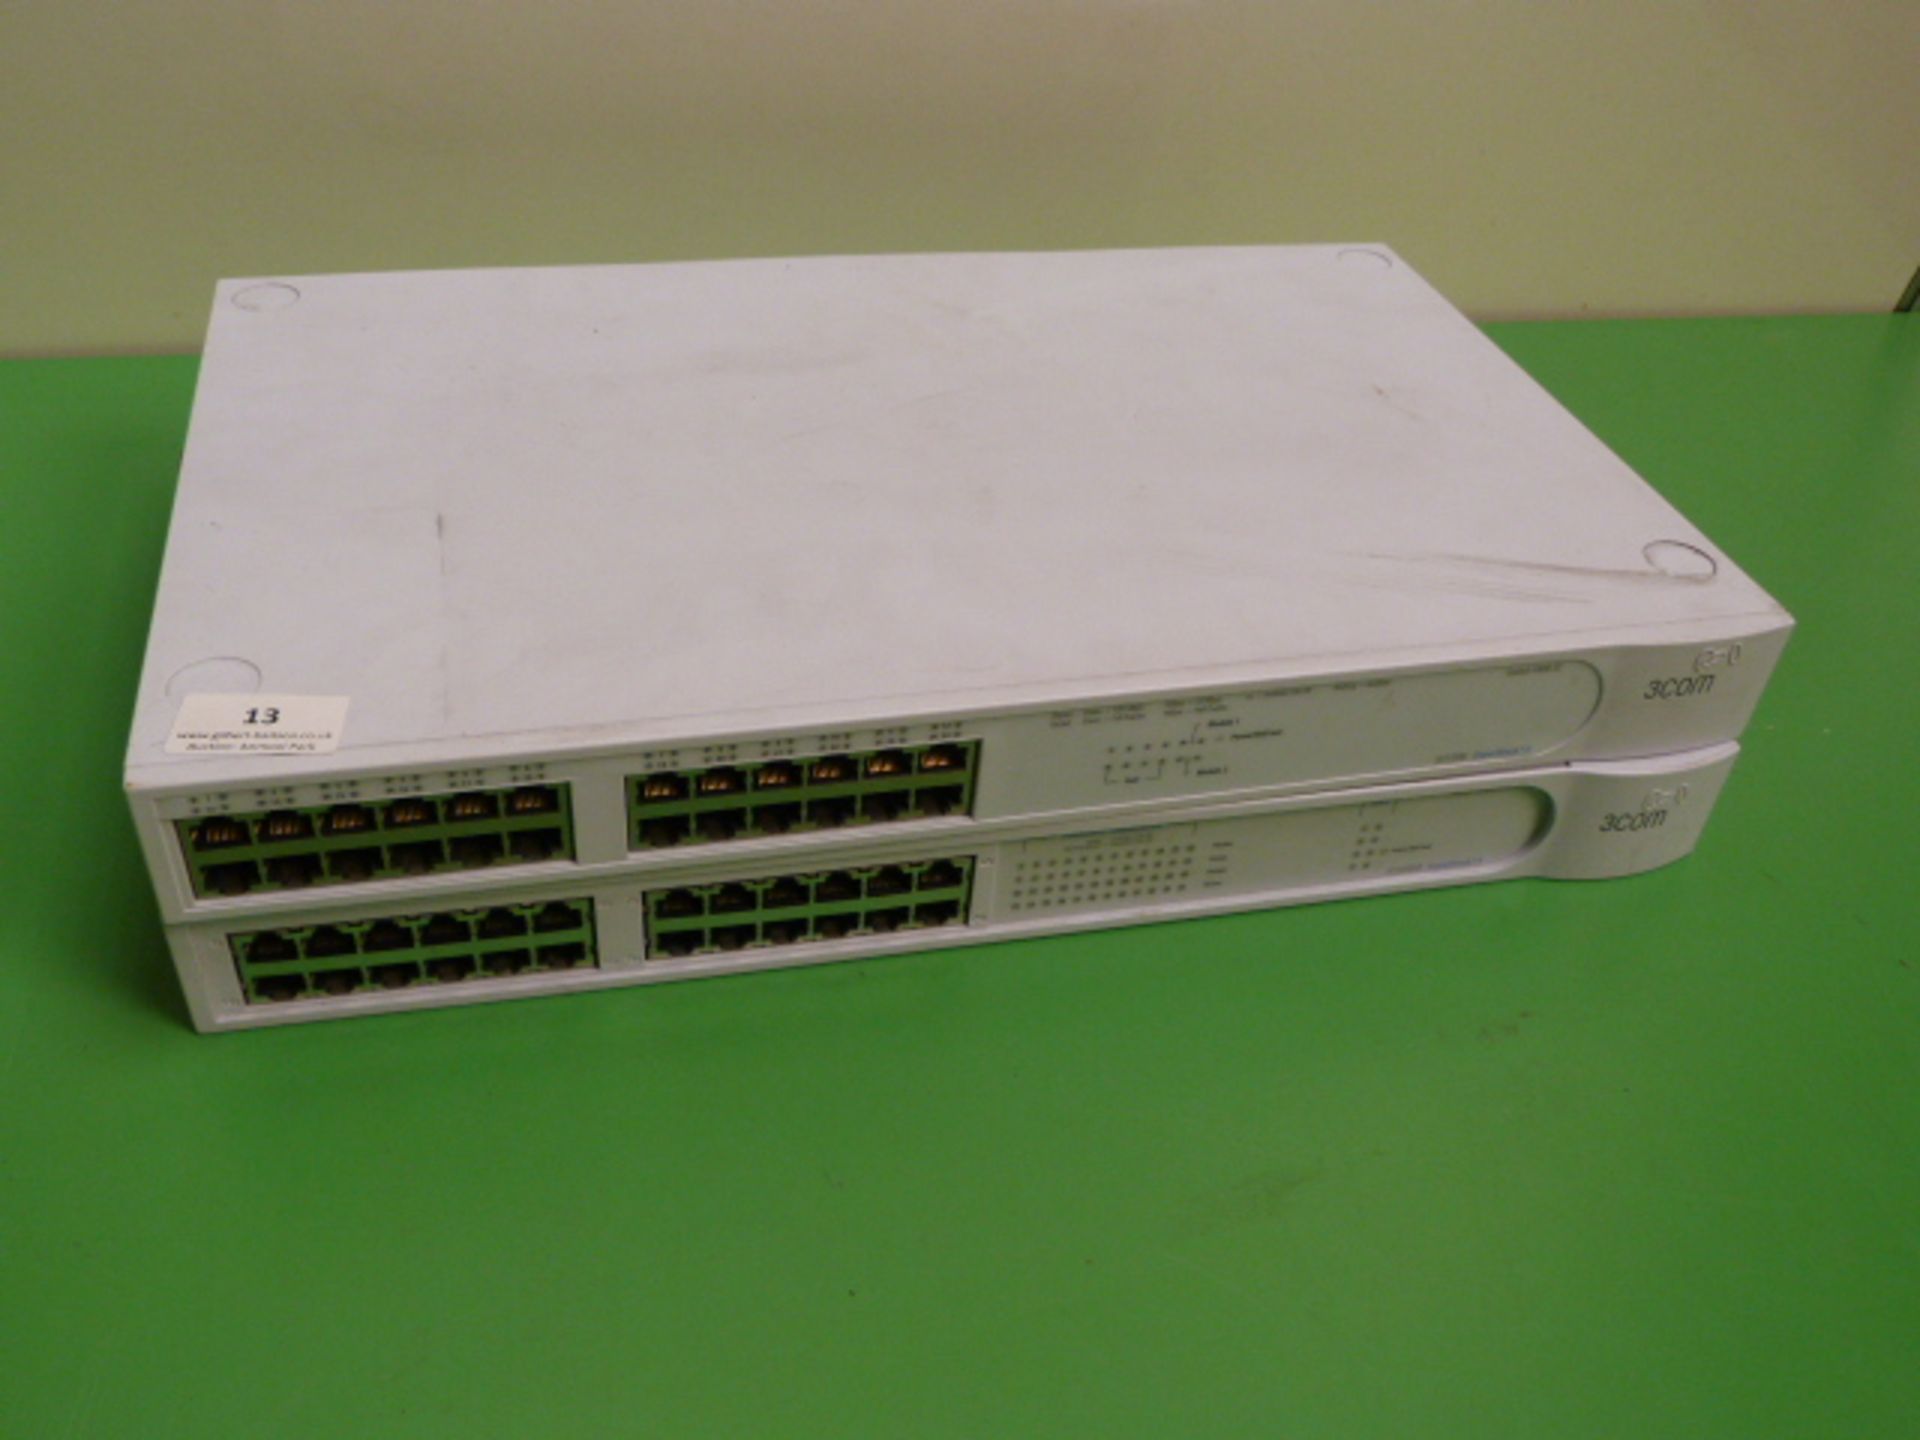 *Two 3Com Switch 4400SE Network Switches